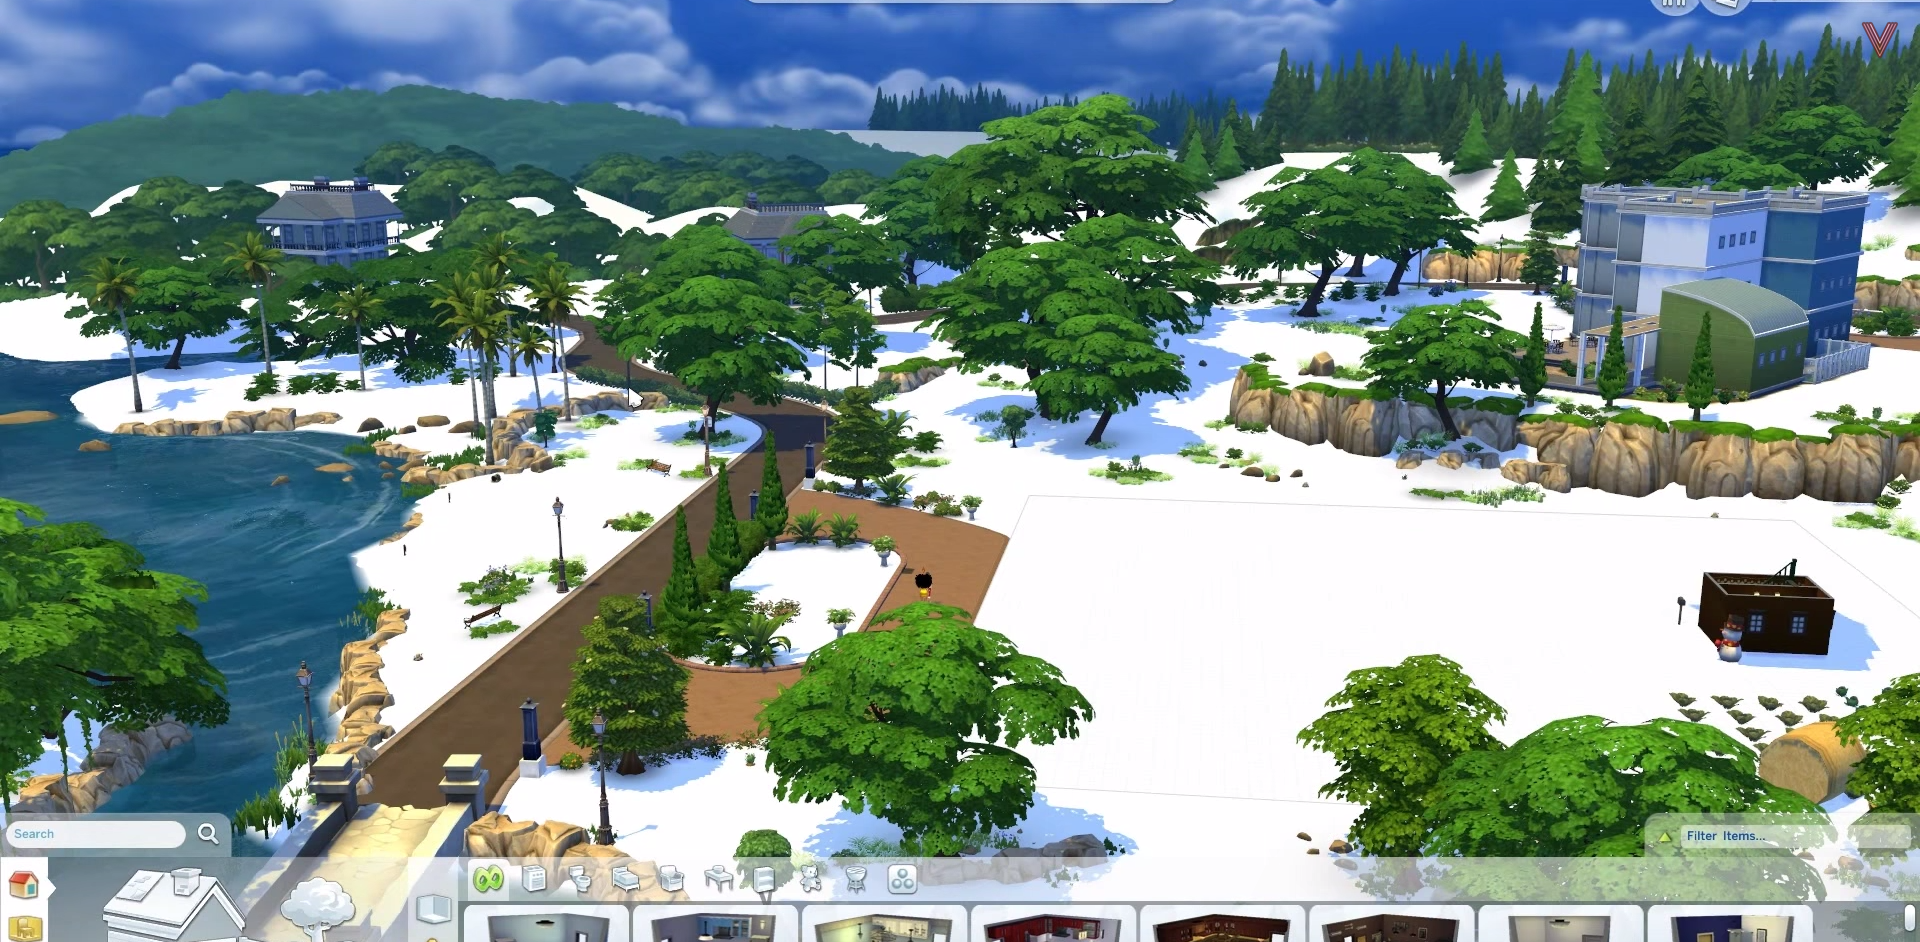 How To Bring More Holiday Cheer To The Sims 4